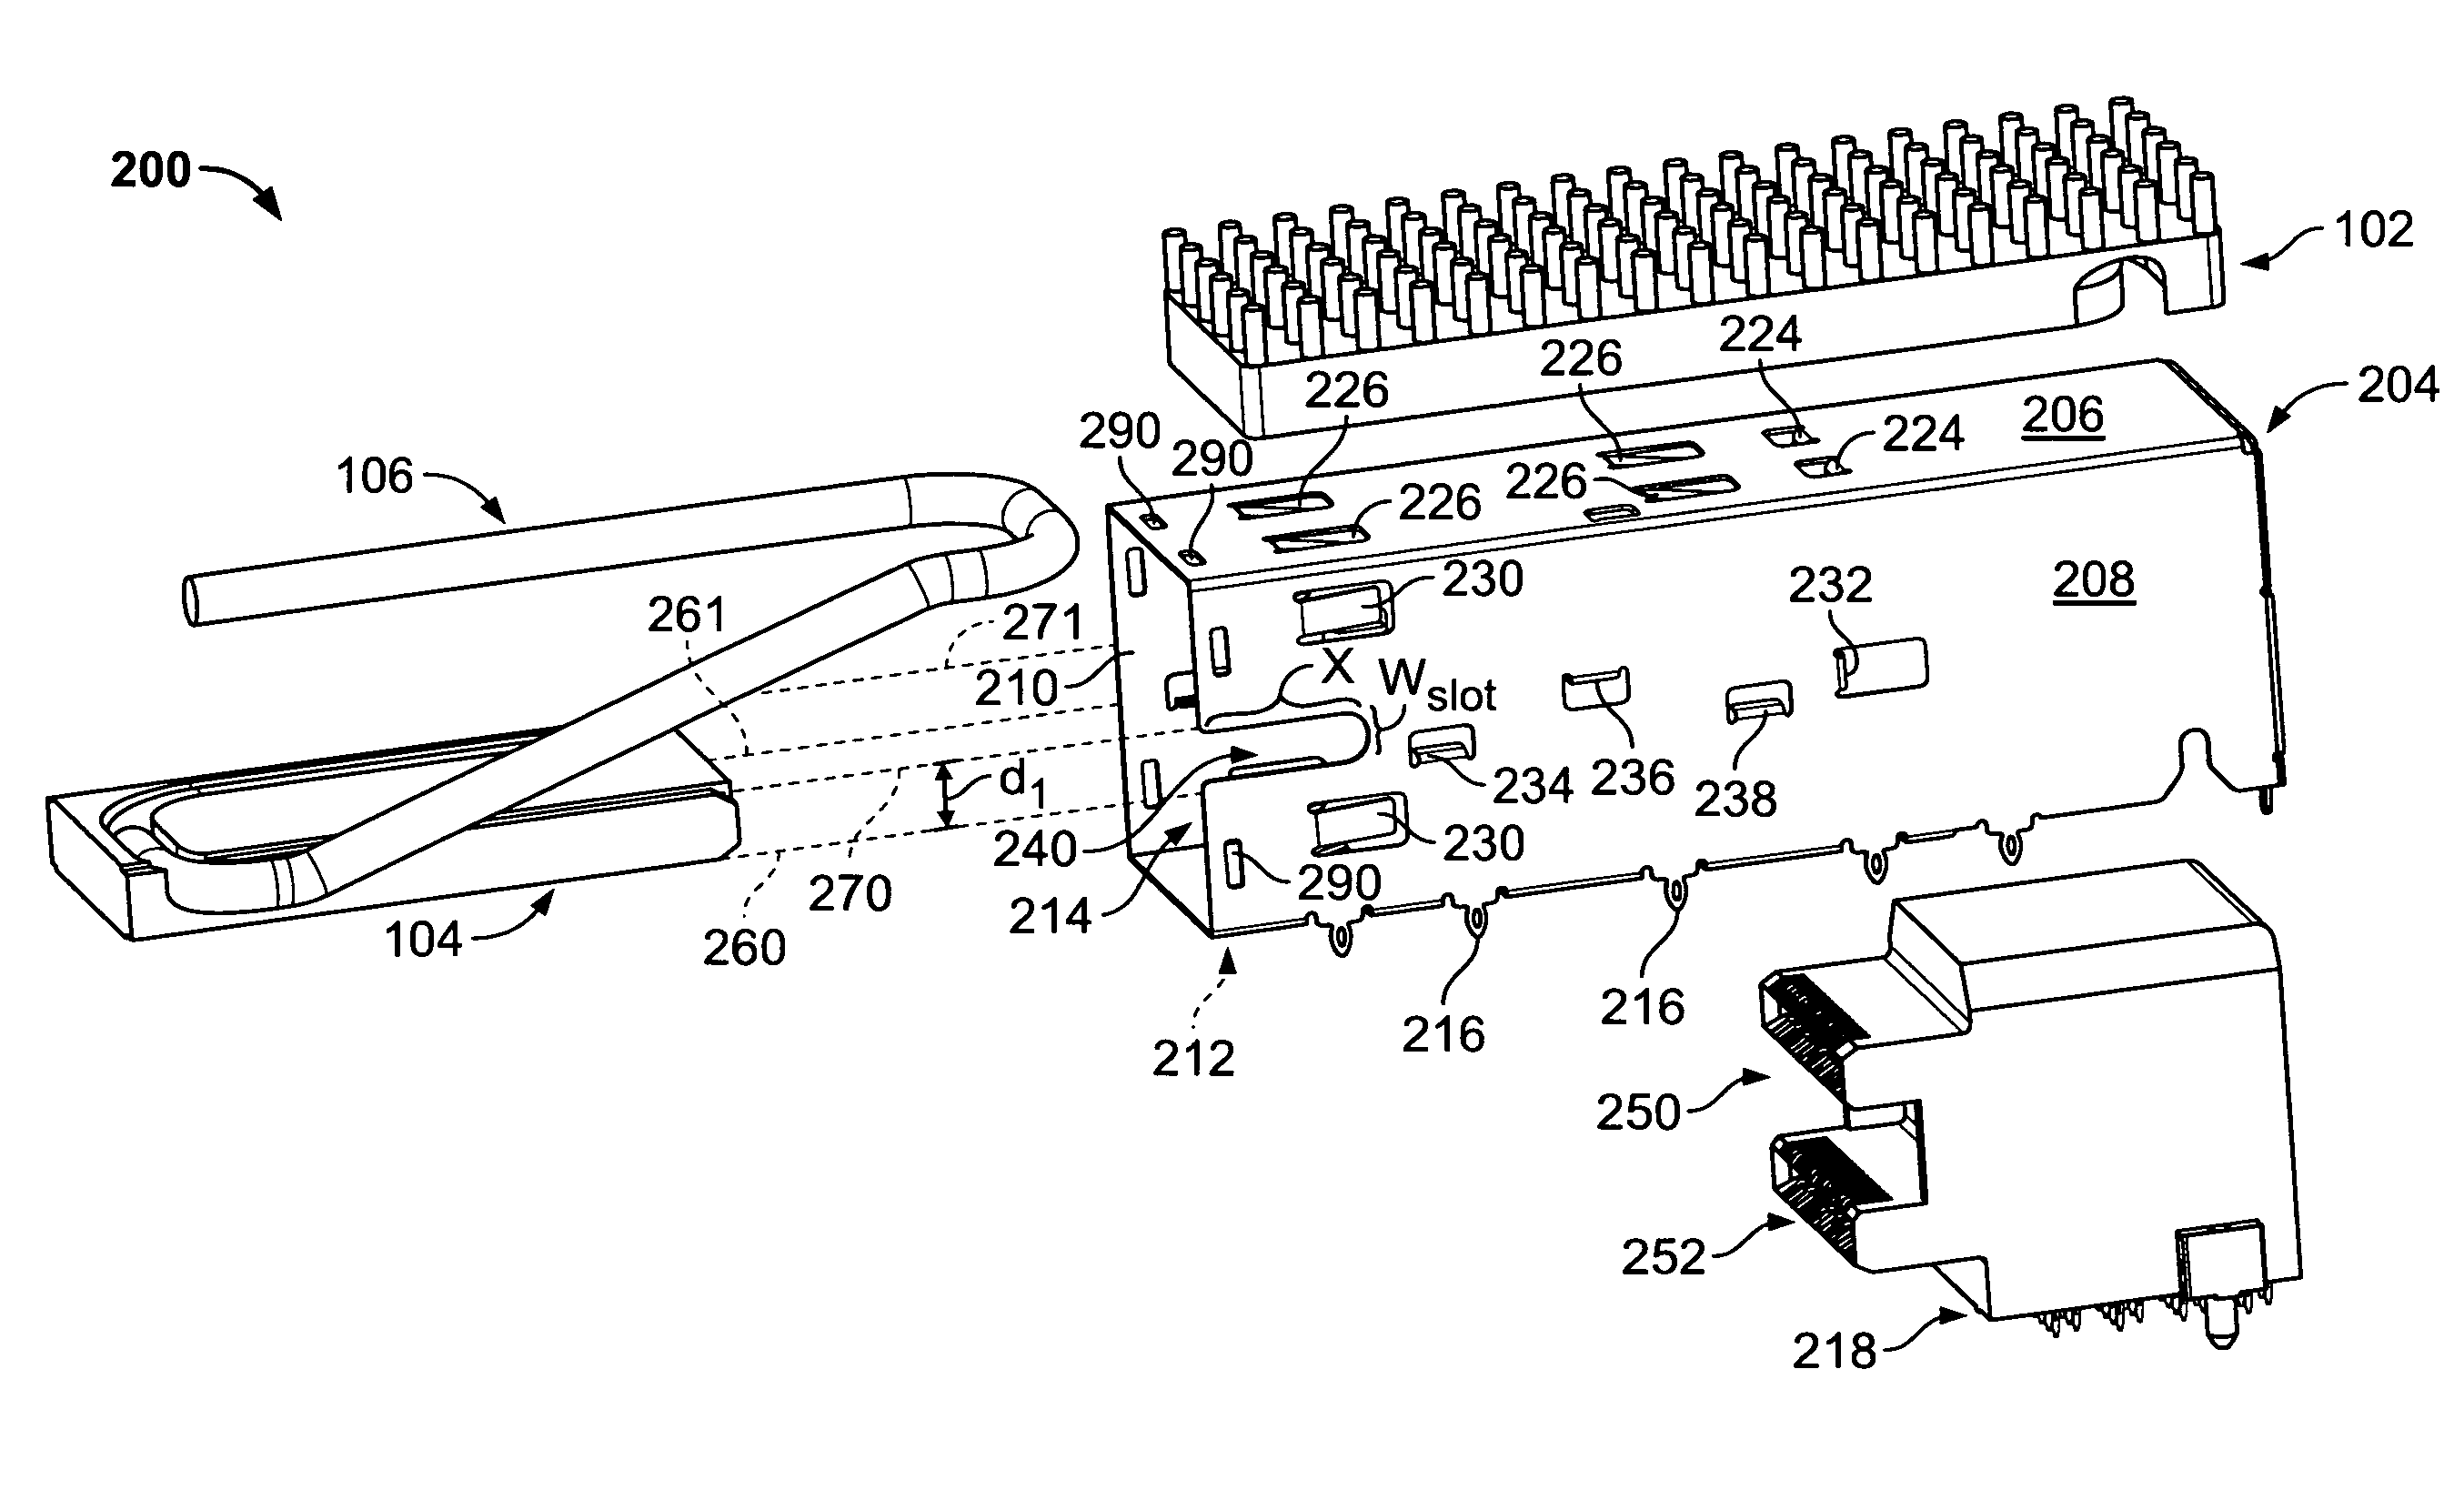 Heat transfer system for a receptacle assembly